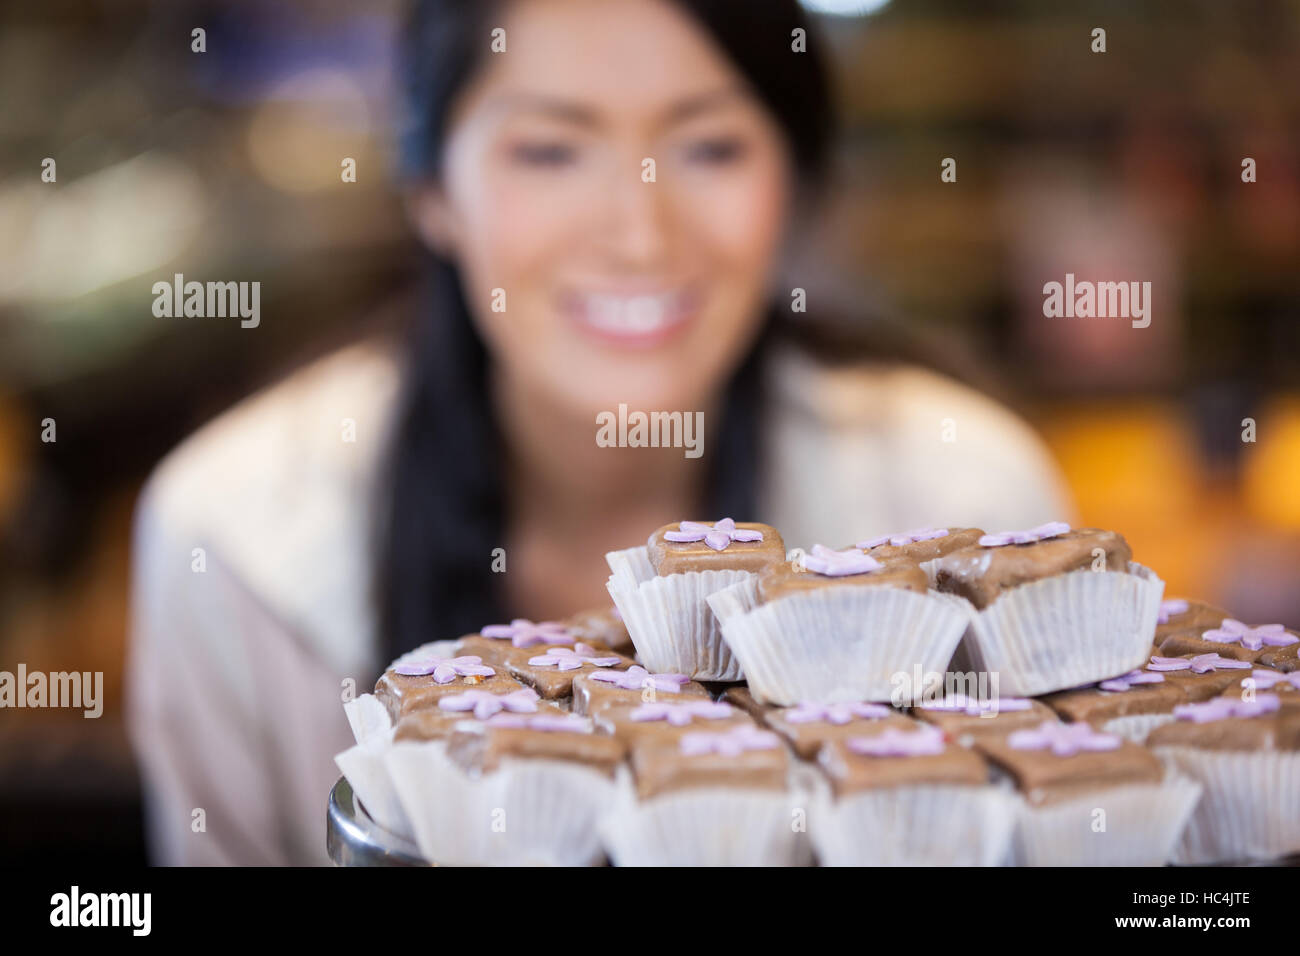 Close-up of cupcakes on cake stand Banque D'Images